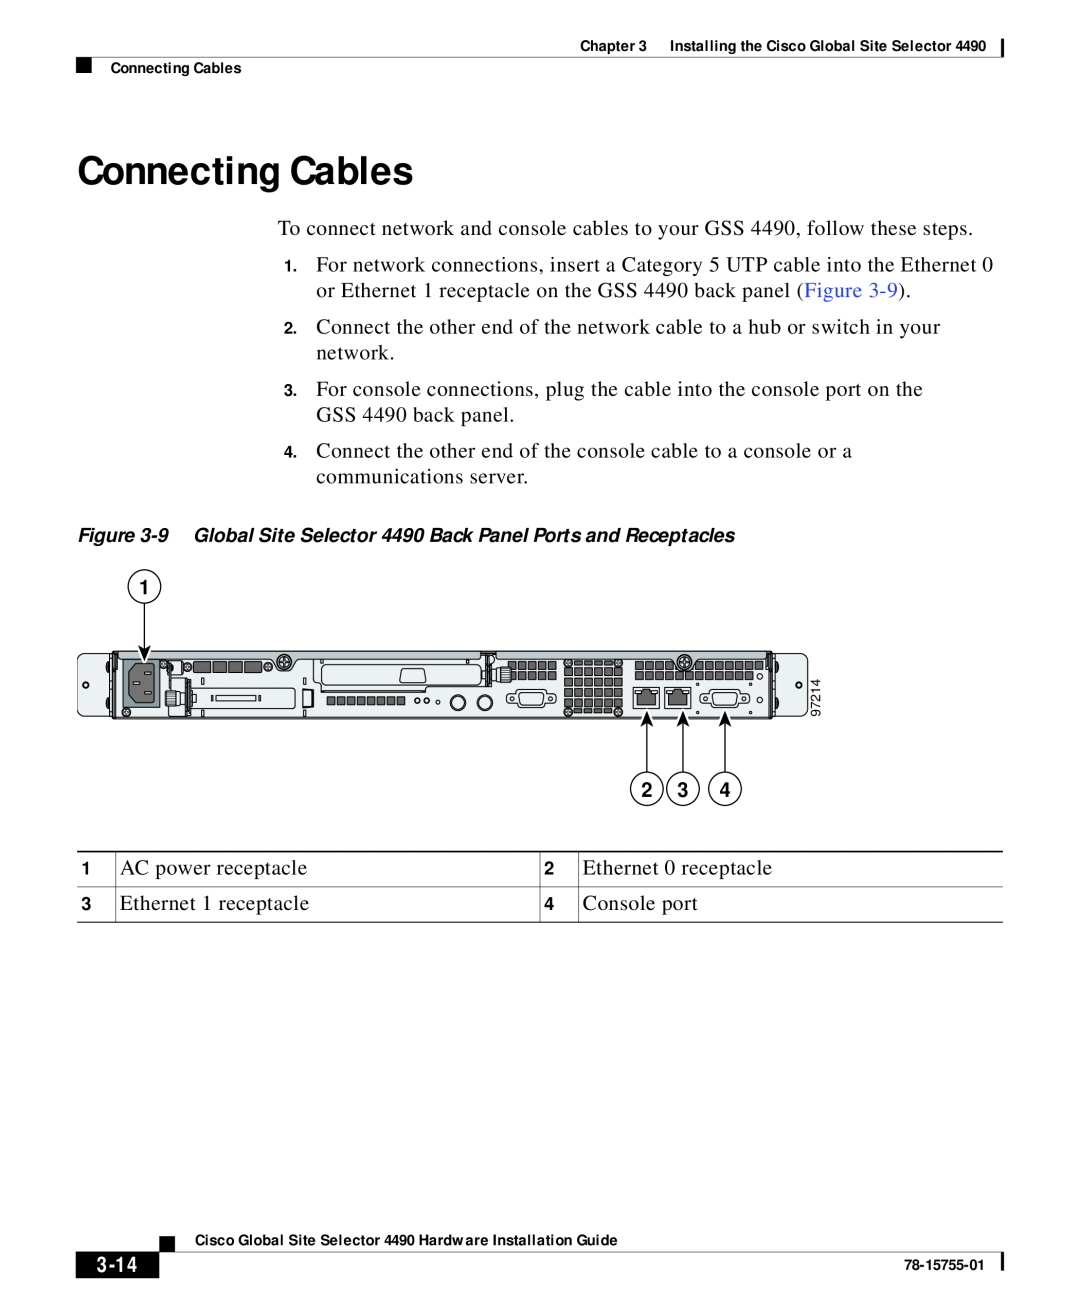 Cisco Systems 4490 appendix Connecting Cables, 3-14 